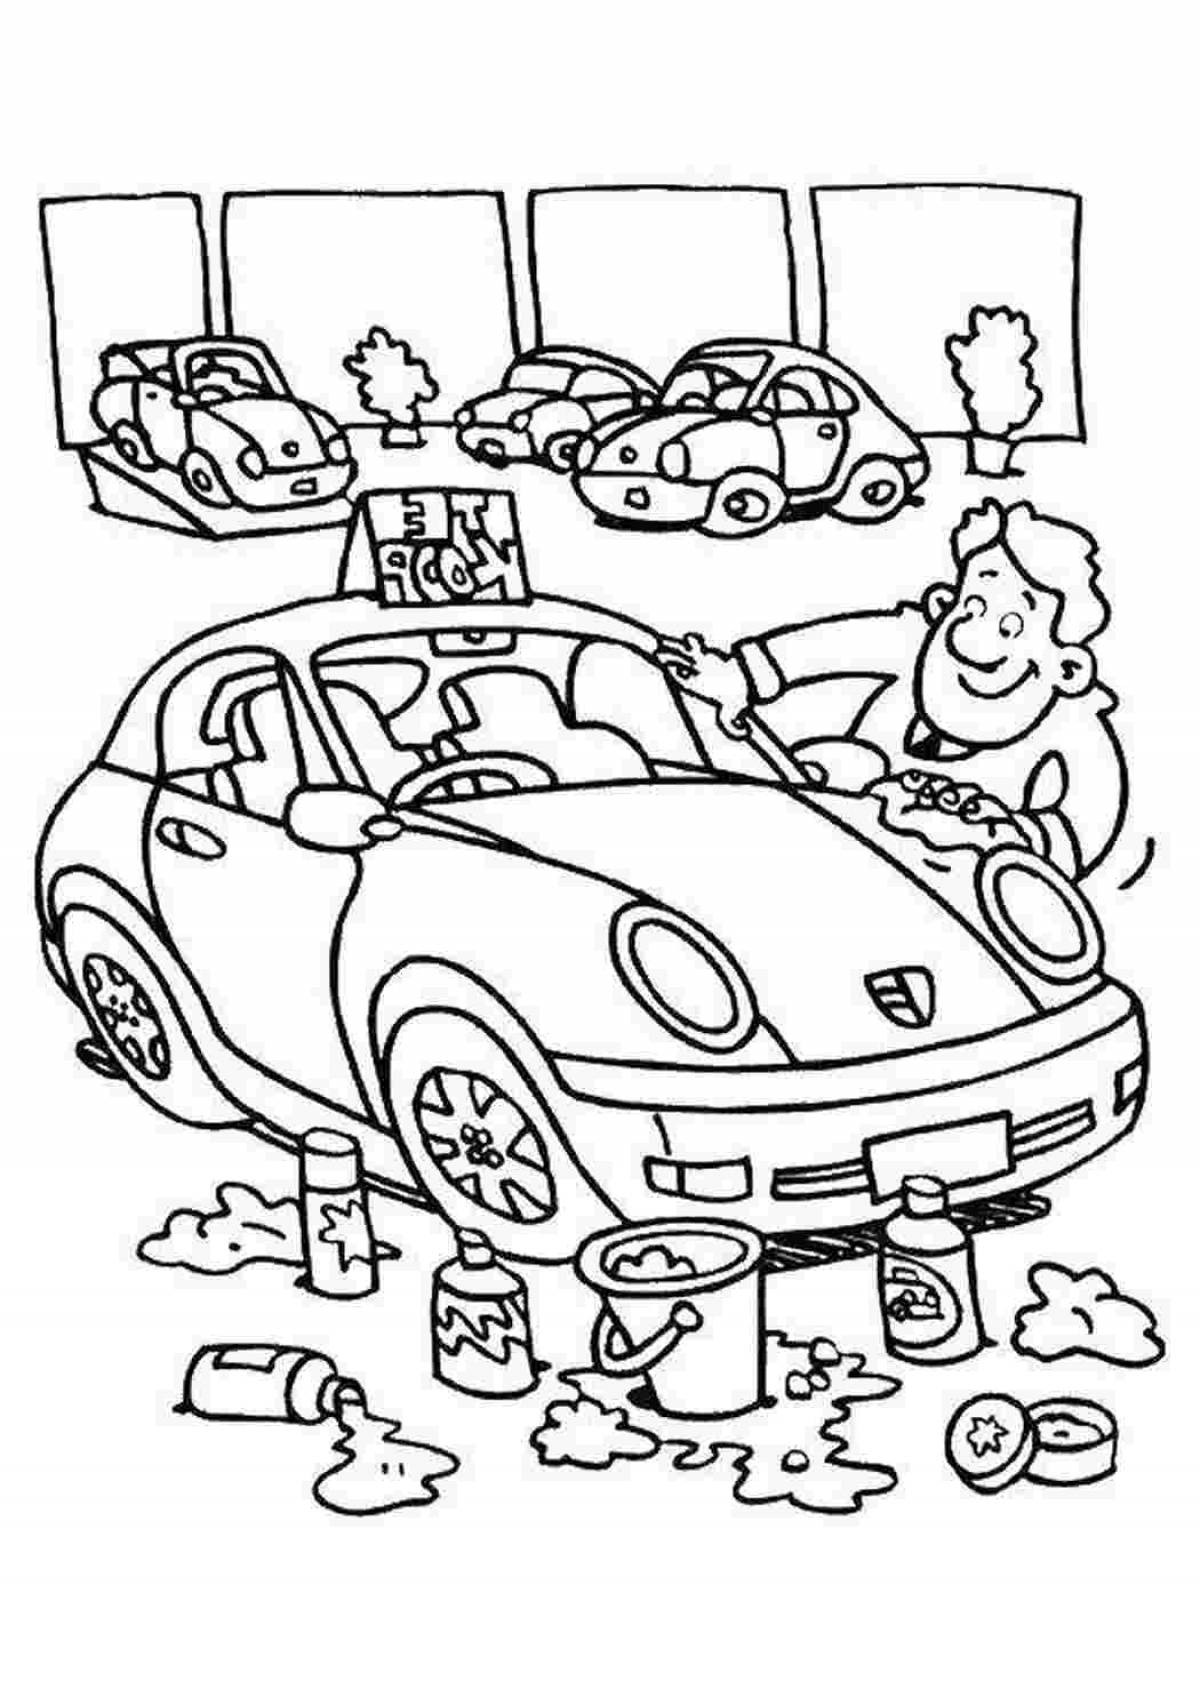 Colorful bright car service coloring page